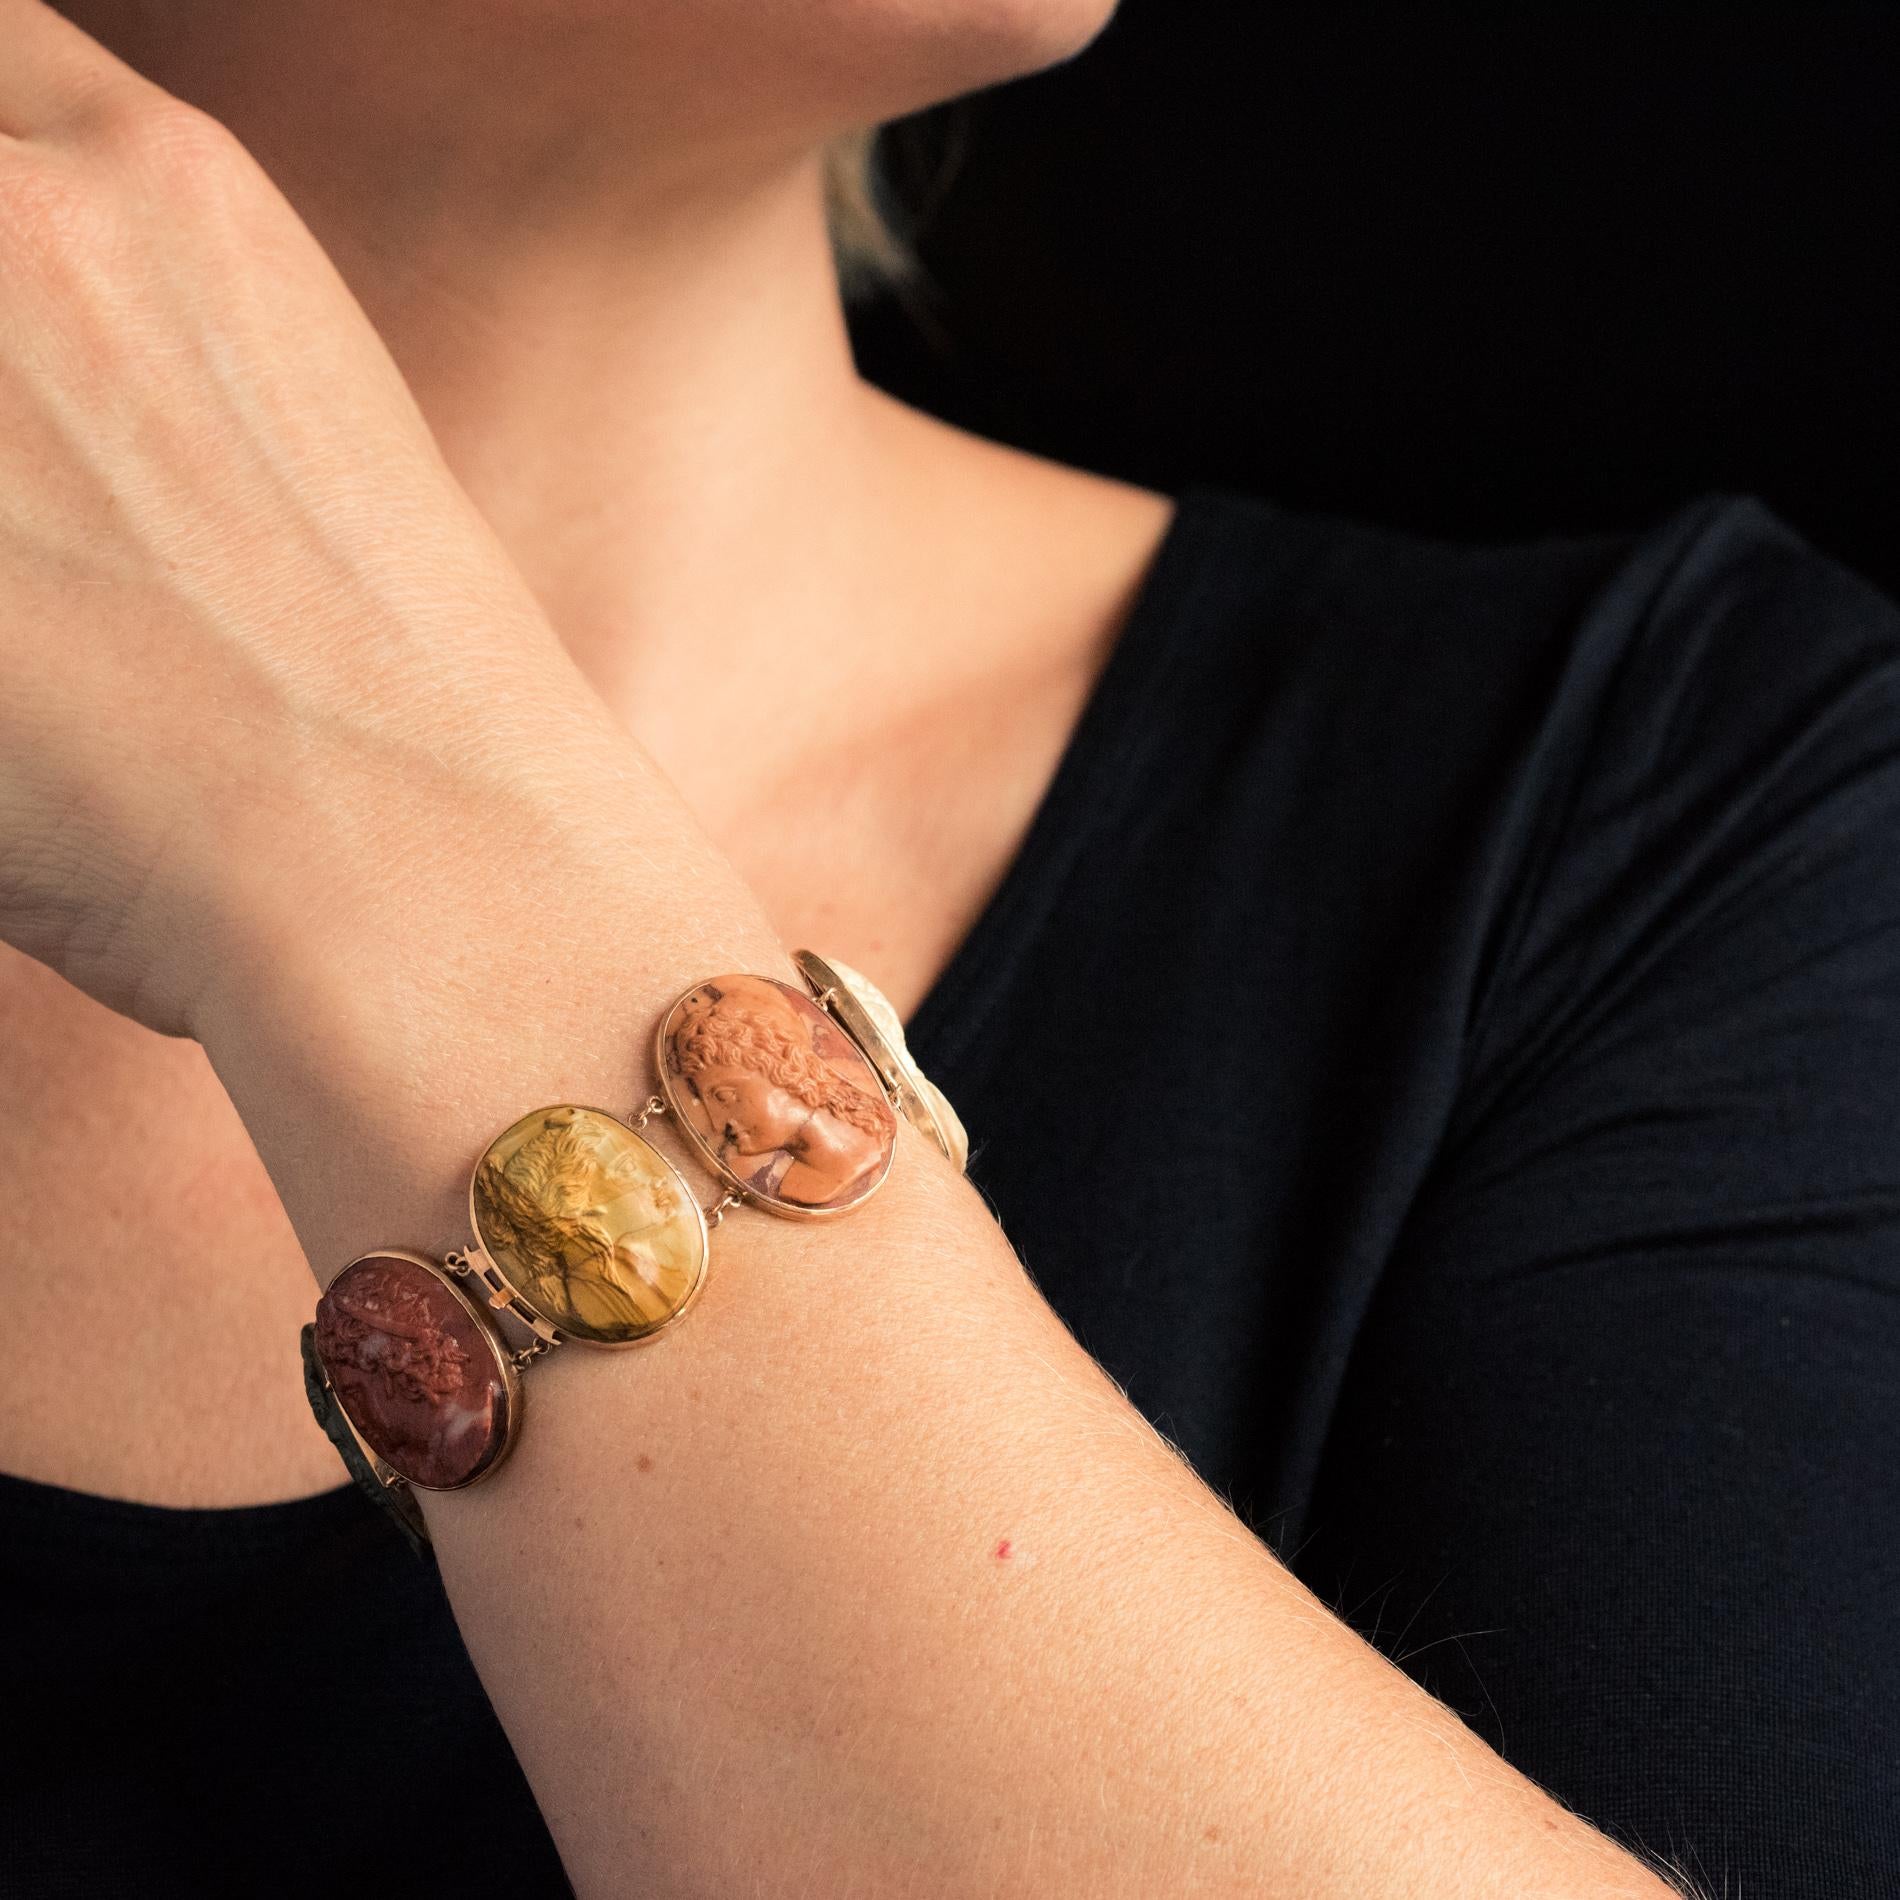 Bracelet in 18 karat rose gold.
Sublime antique jewel, it is adorned with 7 cameos representing profiles of men and women, the one in the center being facing. All are in ornamental stones and marbled lava stone in different colors. They are held